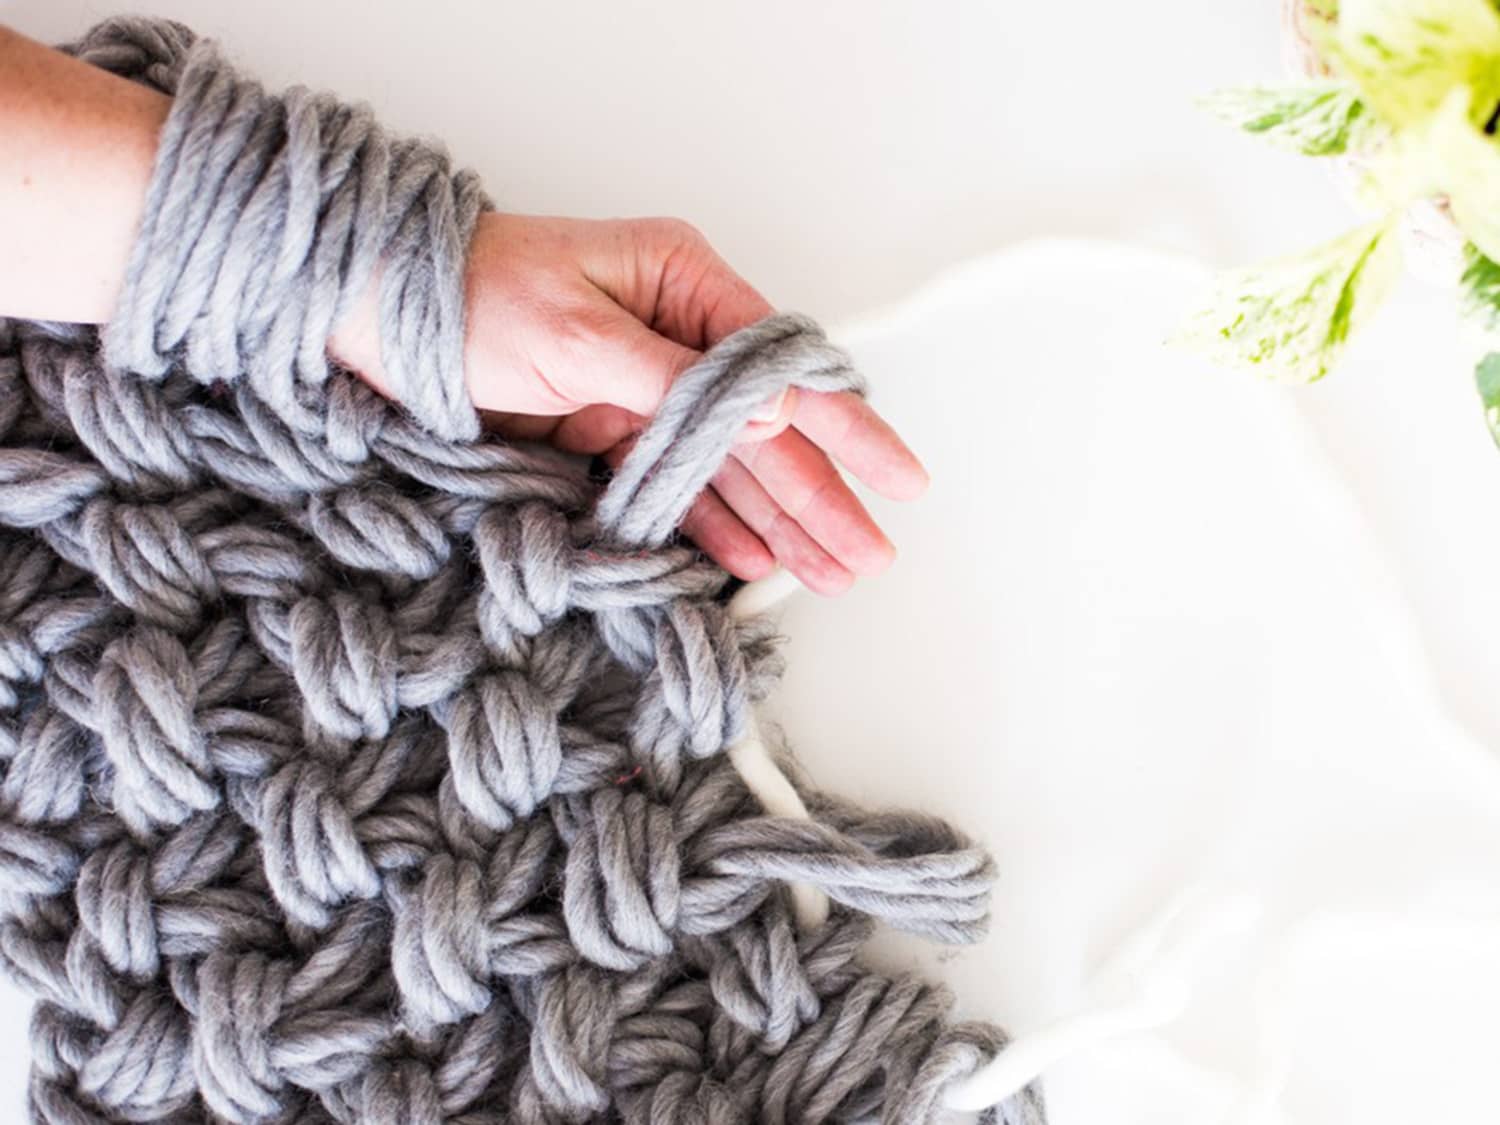 How To Knit A Chunky Blanket With Circular Needles